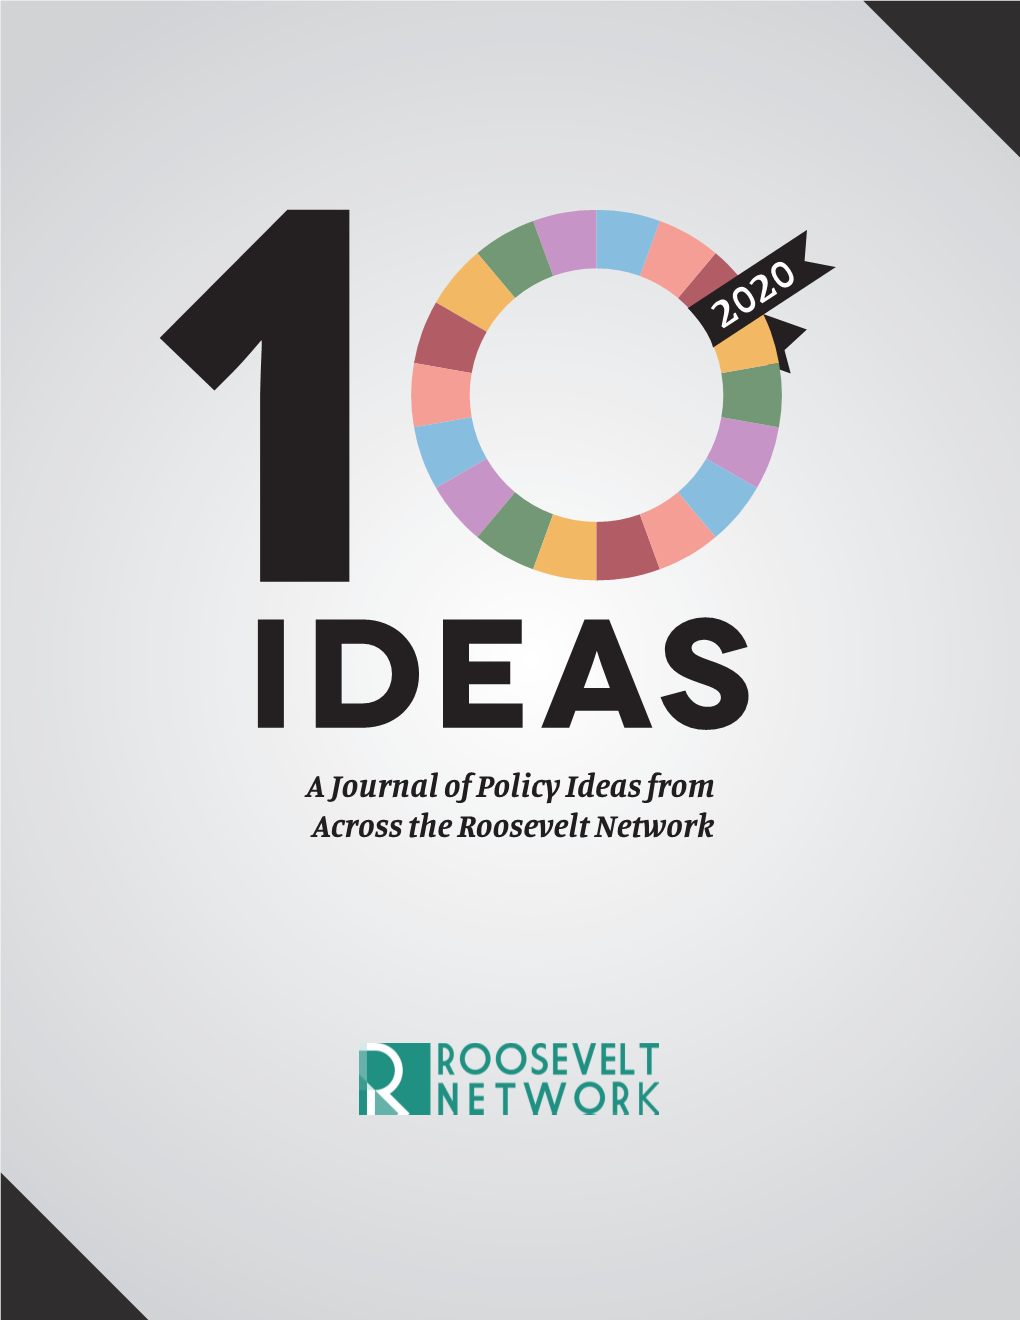 A Journal of Policy Ideas from Across the Roosevelt Network